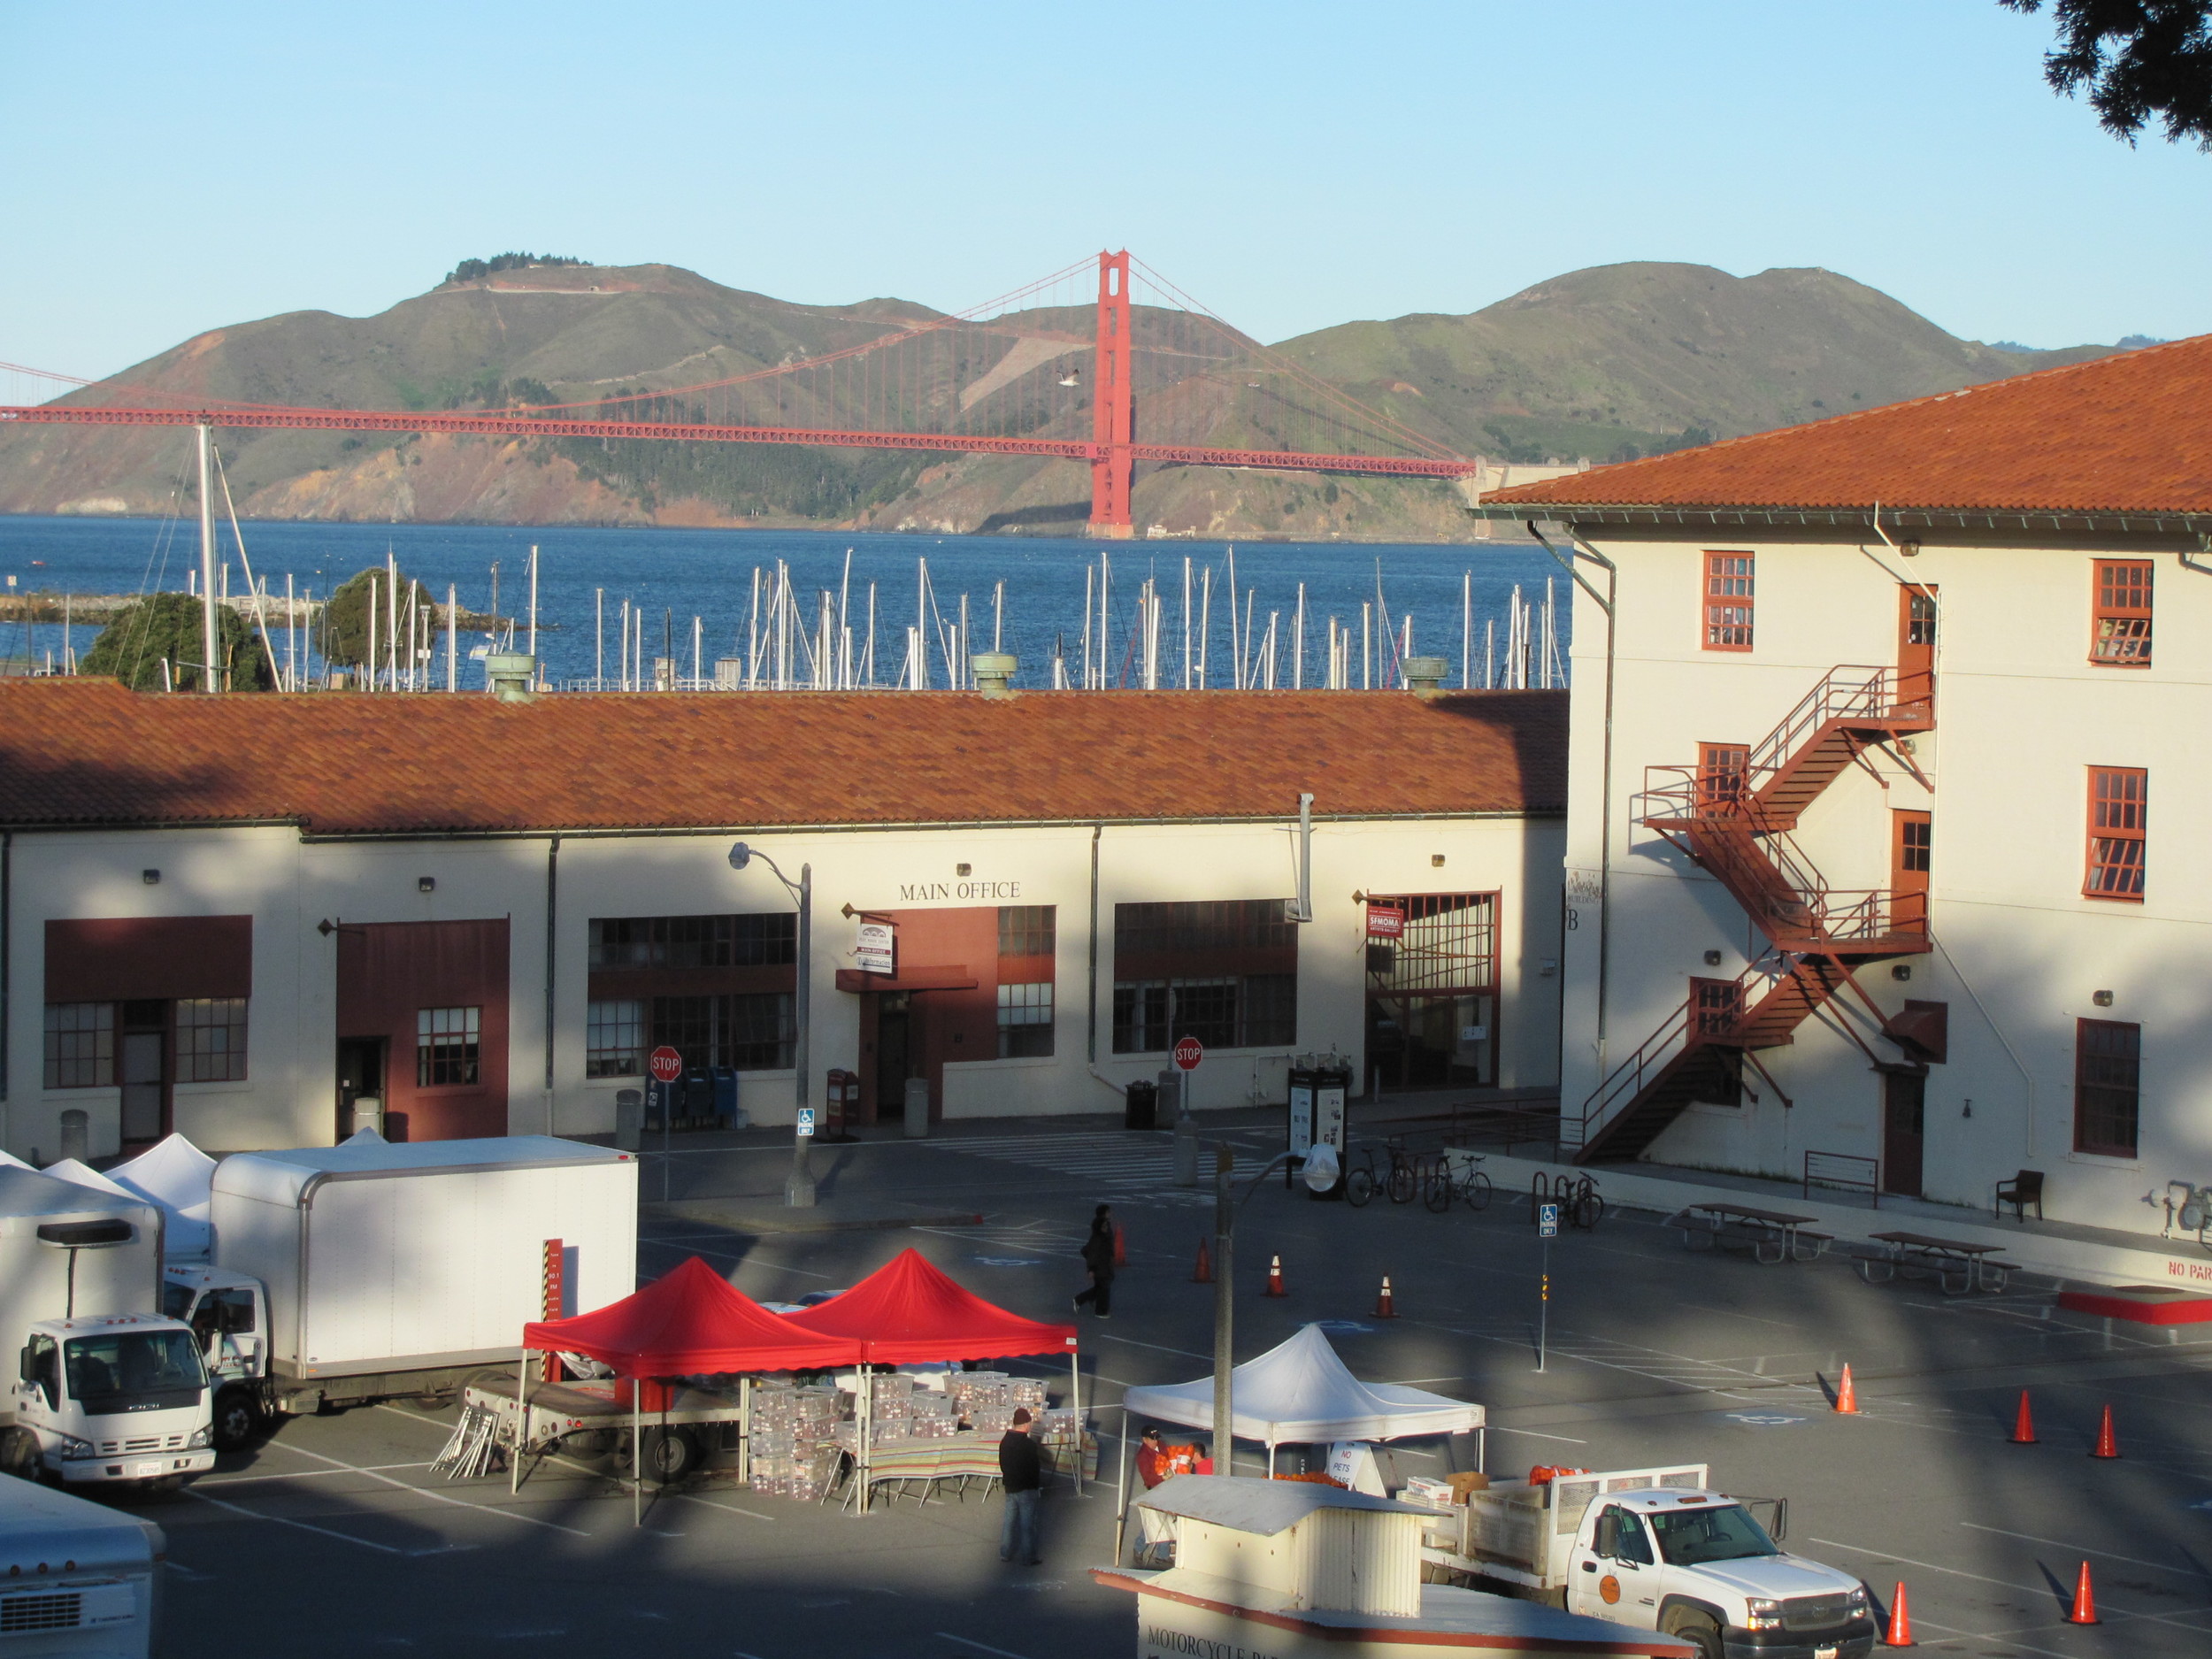 Setting up the Fort Mason Center Farmers' Market with a view of Golden Gate Bridge